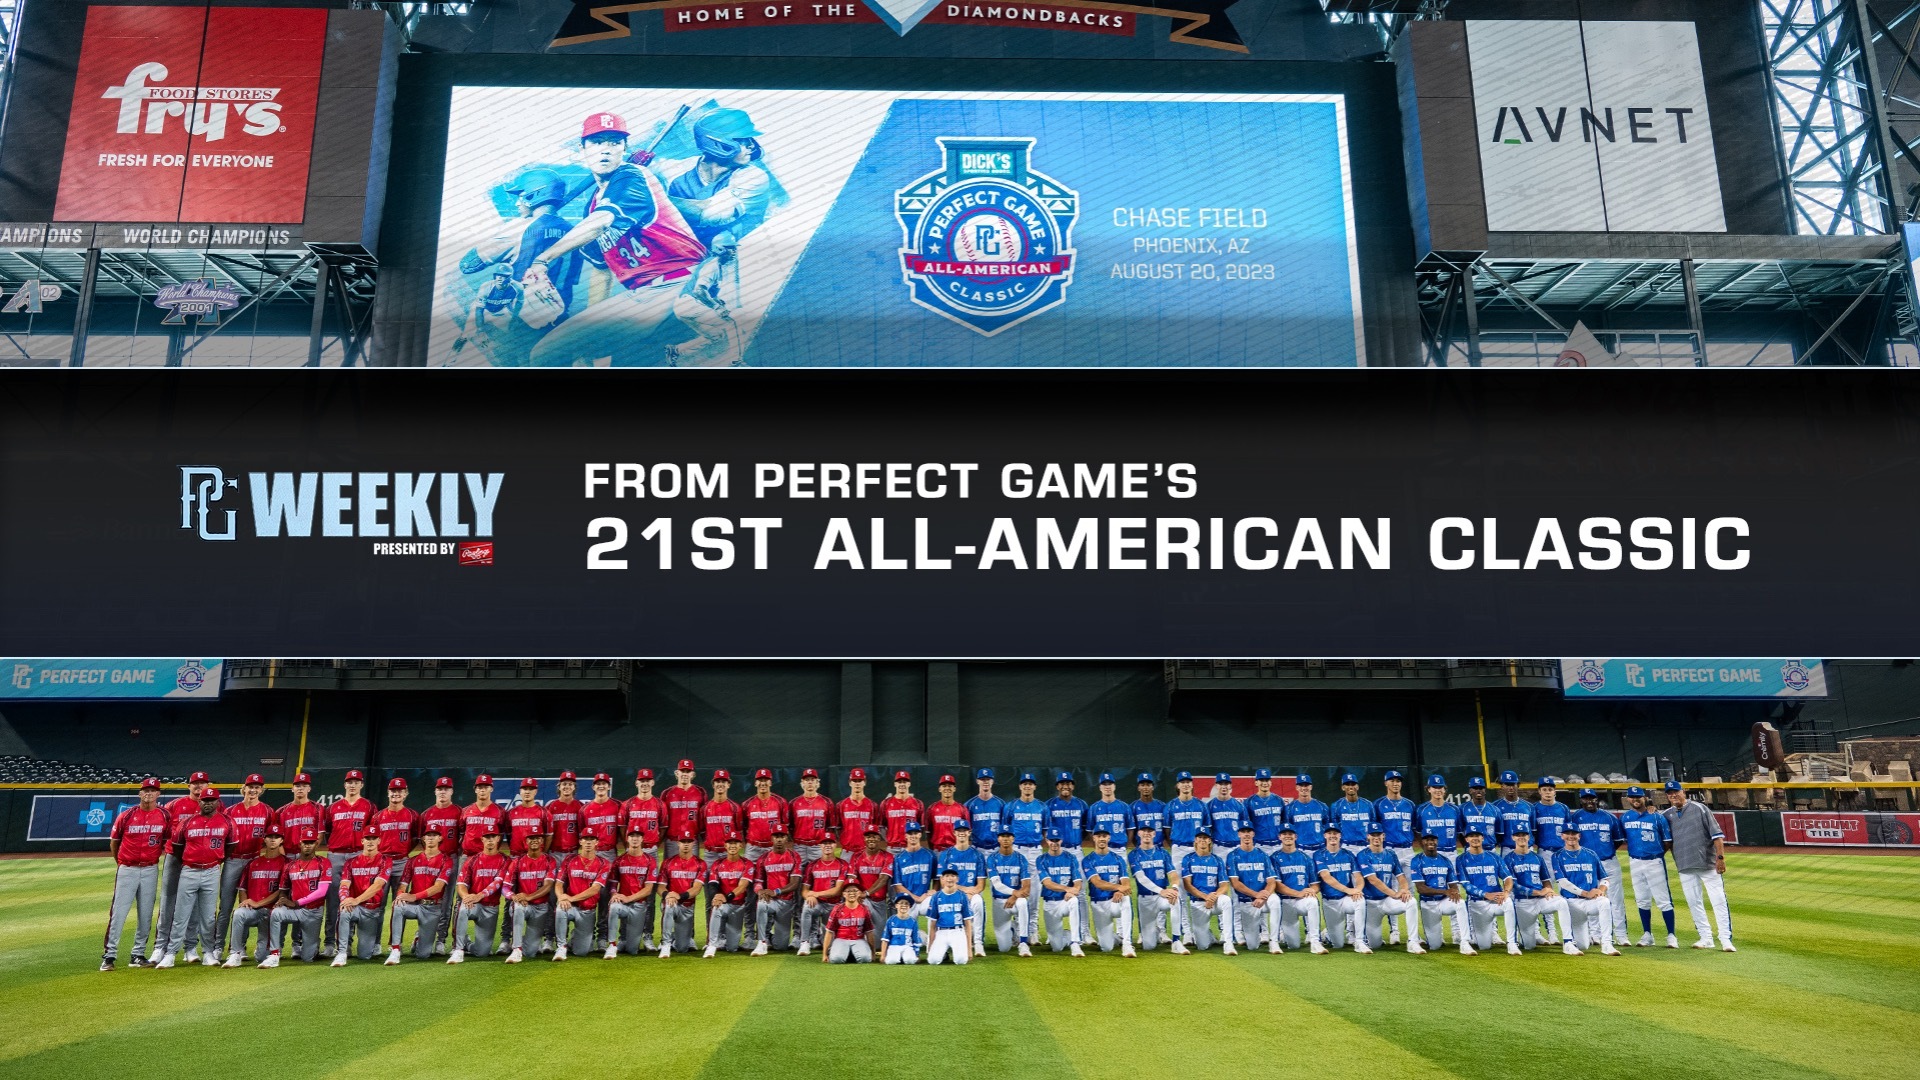 From the 21st PG All-American Classic PerfectGame